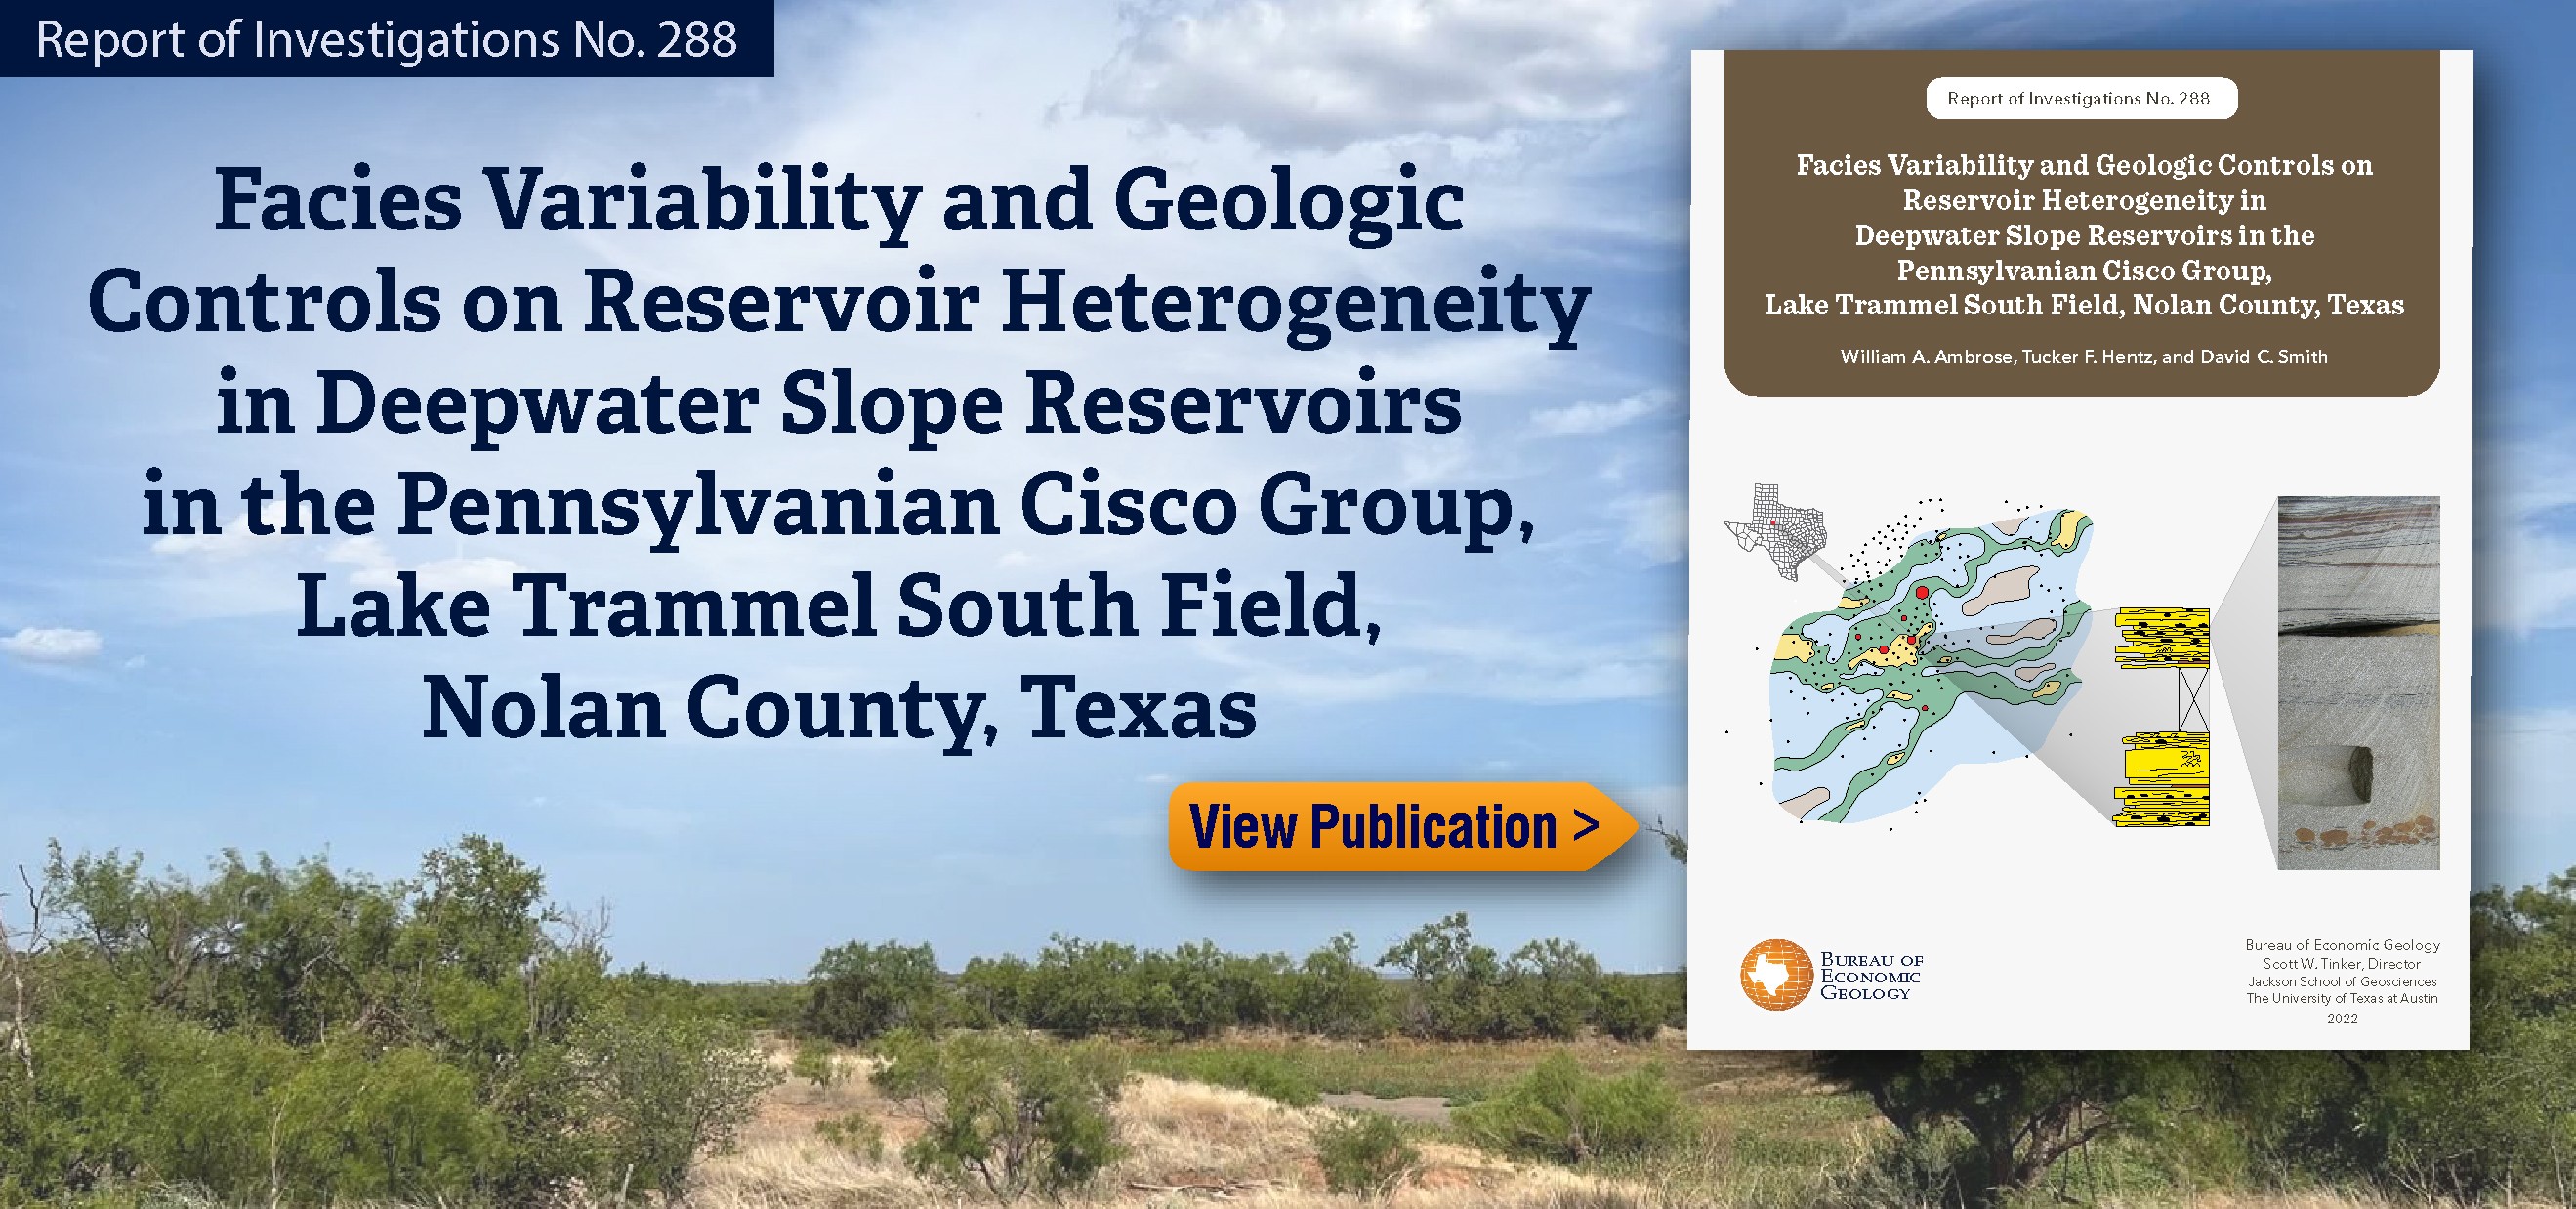 RI0288: Facies variability and geologic controls on reservoir heterogeneity in deepwater slope reservoirs in the Pennsylvanian Cisco Group, Lake Trammel South field, Nolan County, Texas